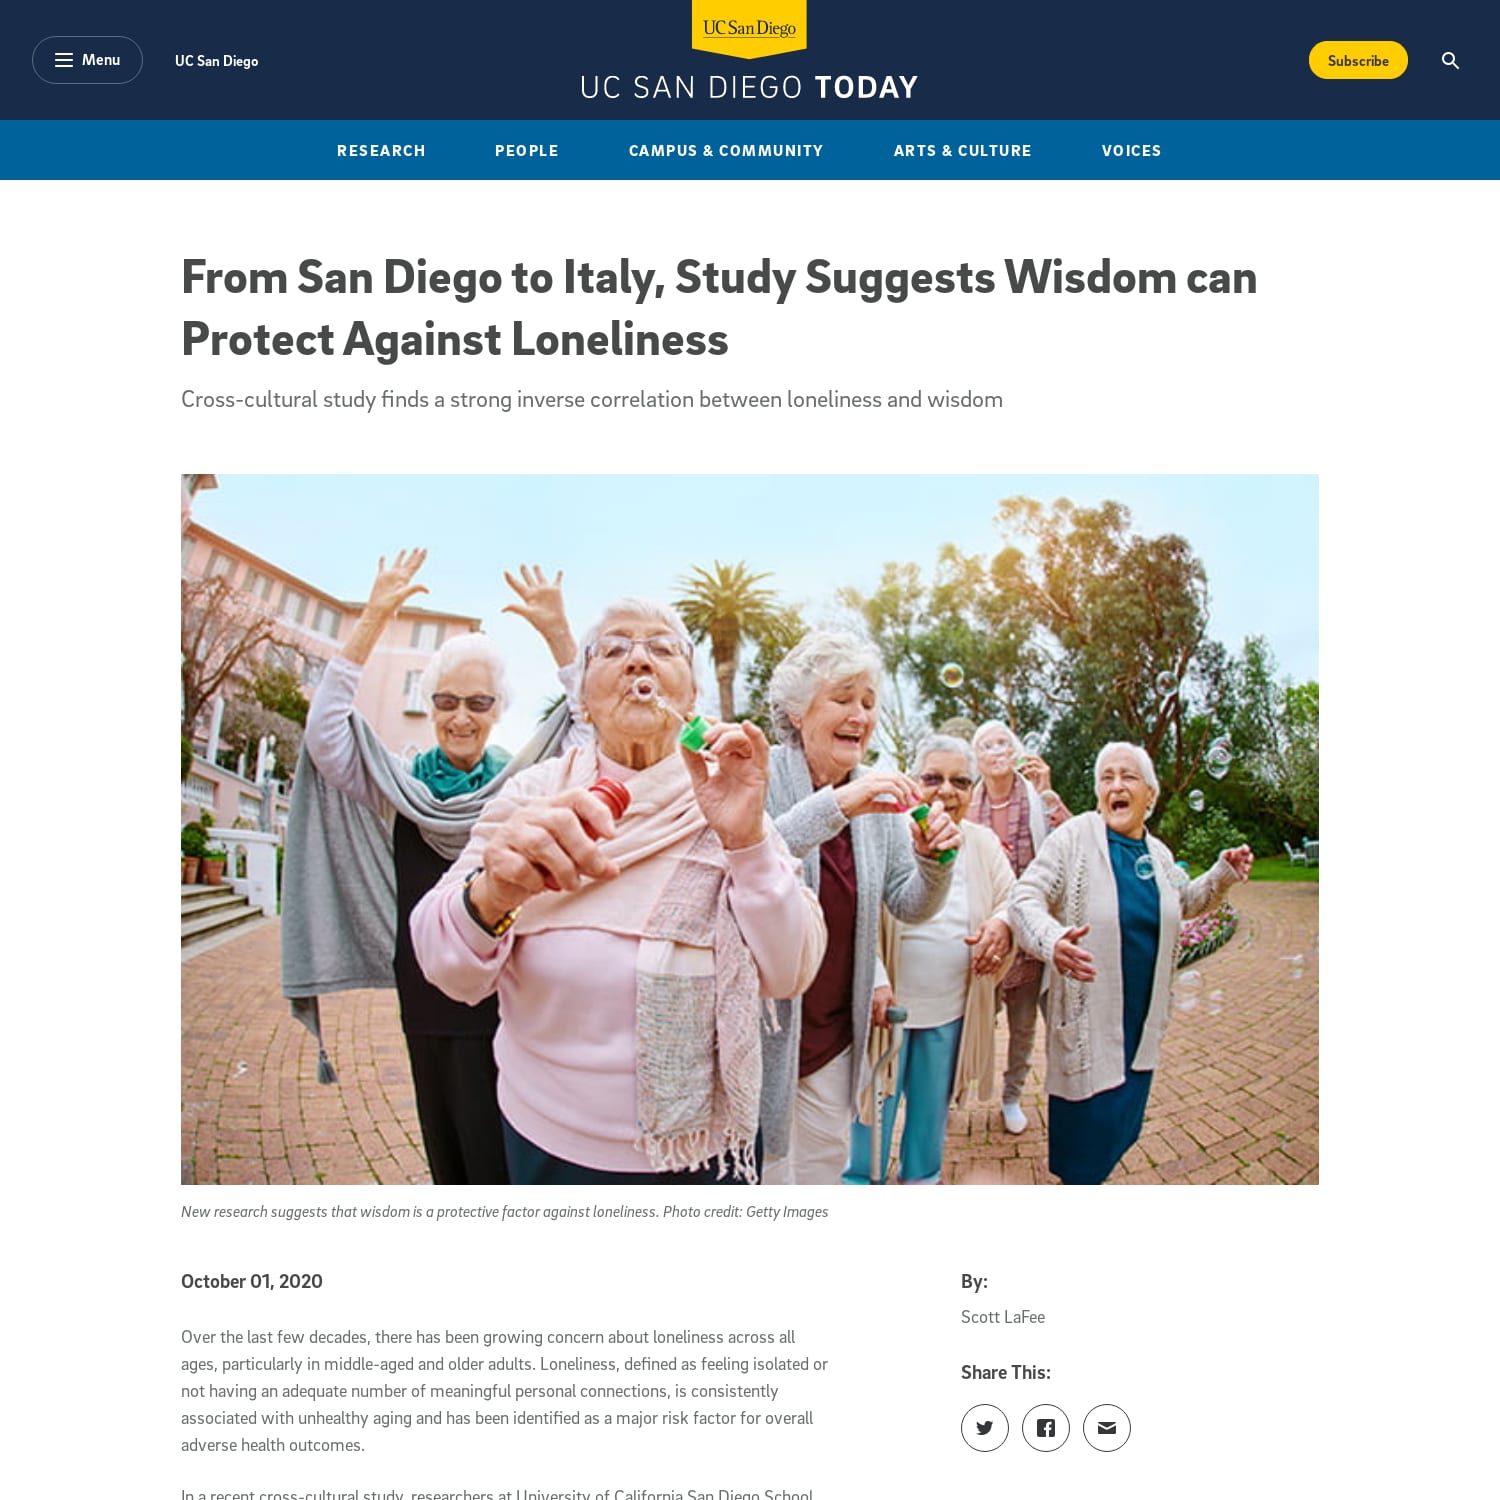 From San Diego to Italy, Study Suggests Wisdom can Protect Against Loneliness - "Cross-cultural study finds a strong inverse correlation between loneliness and wisdom"